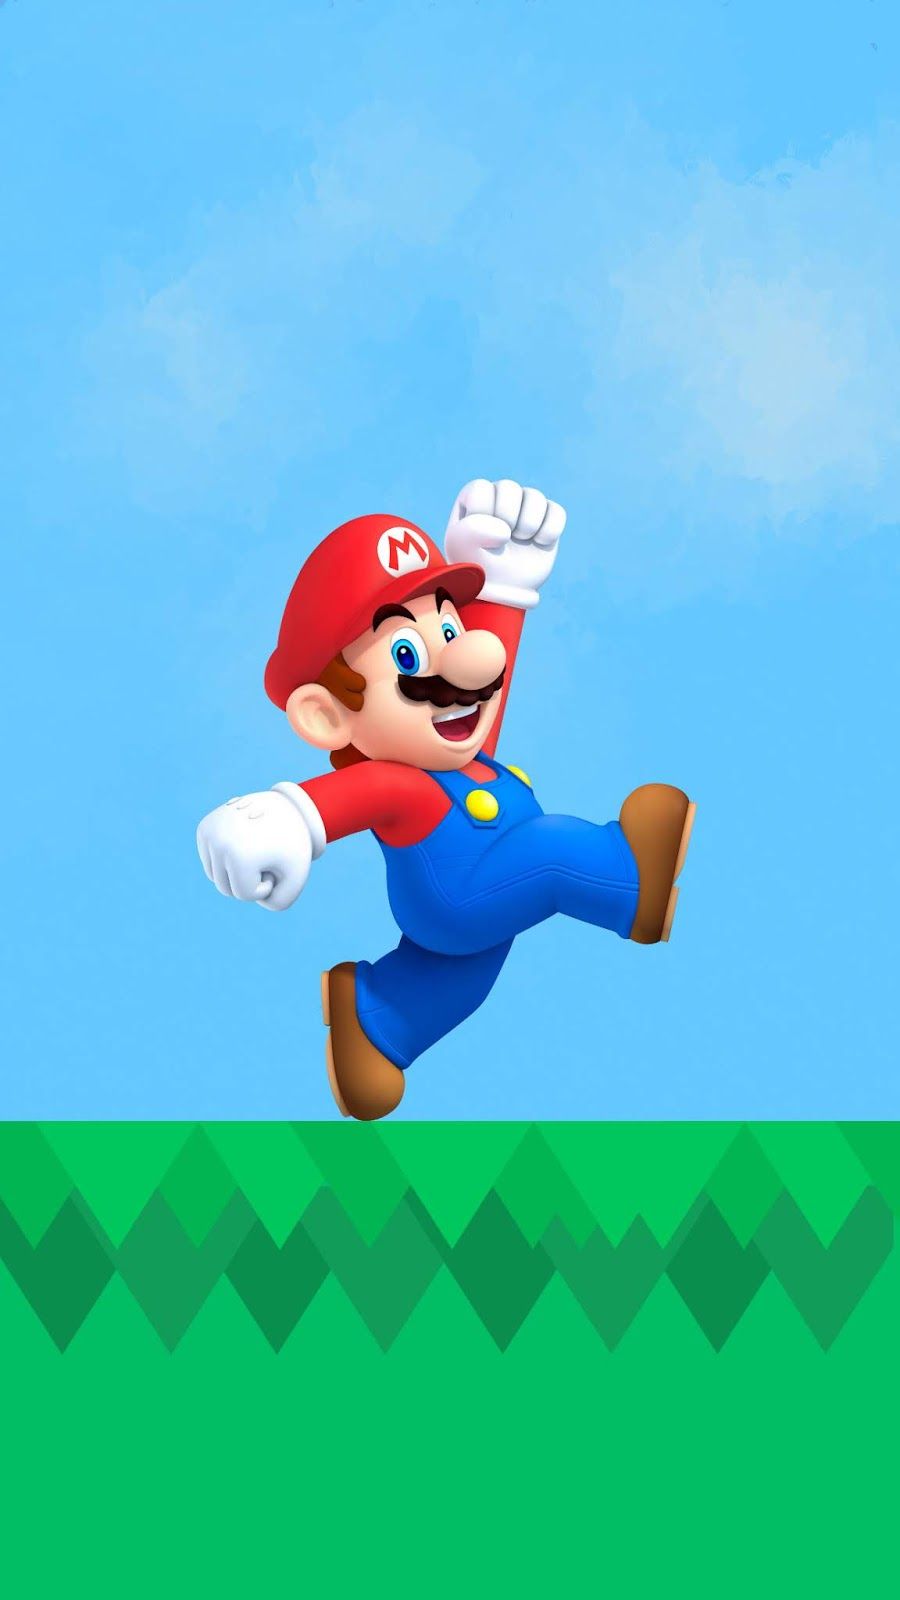 Phone wallpaper collection. Cool Wallpaper.cc. Super mario bros, Super mario art, Mario bros